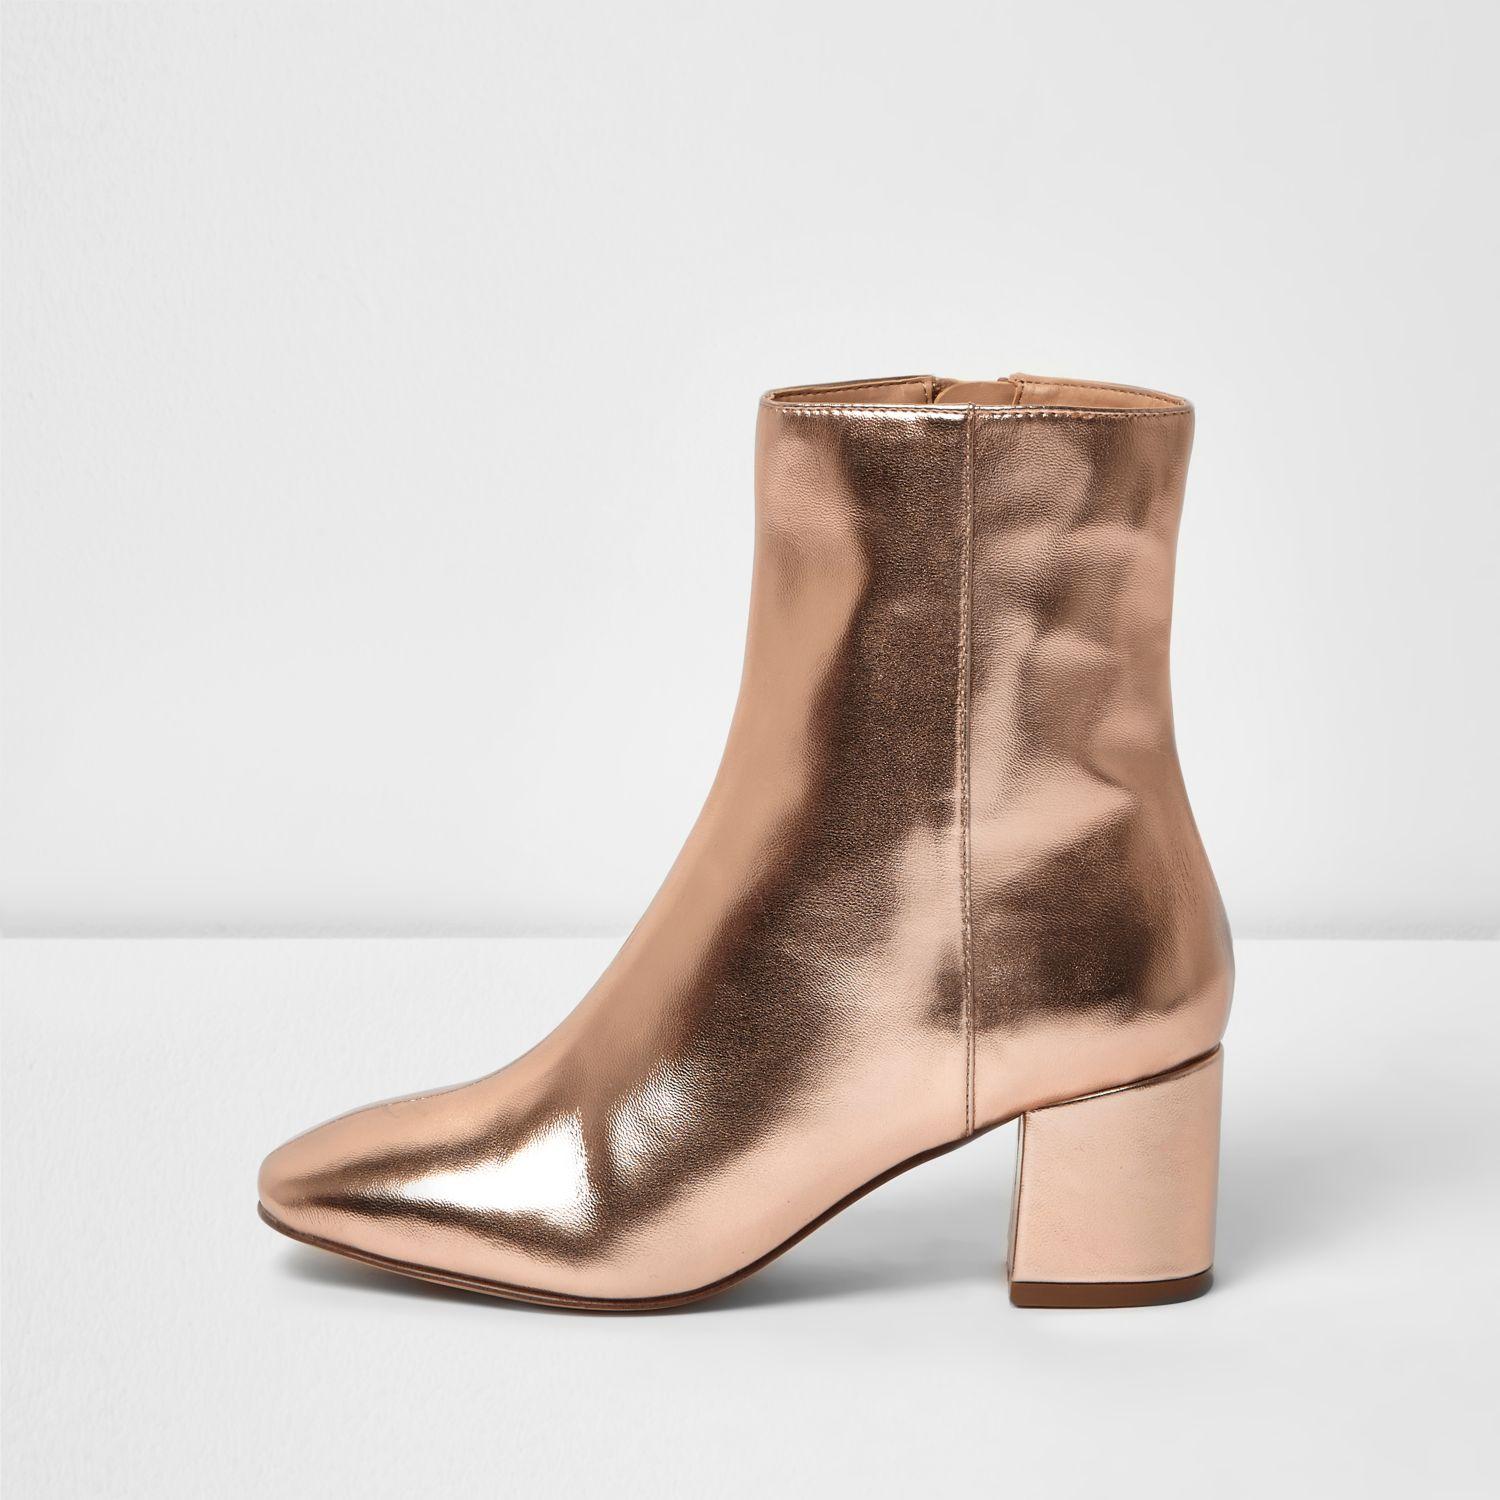 River Island Rose Gold Block Heel Ankle Boot in Brown | Lyst UK